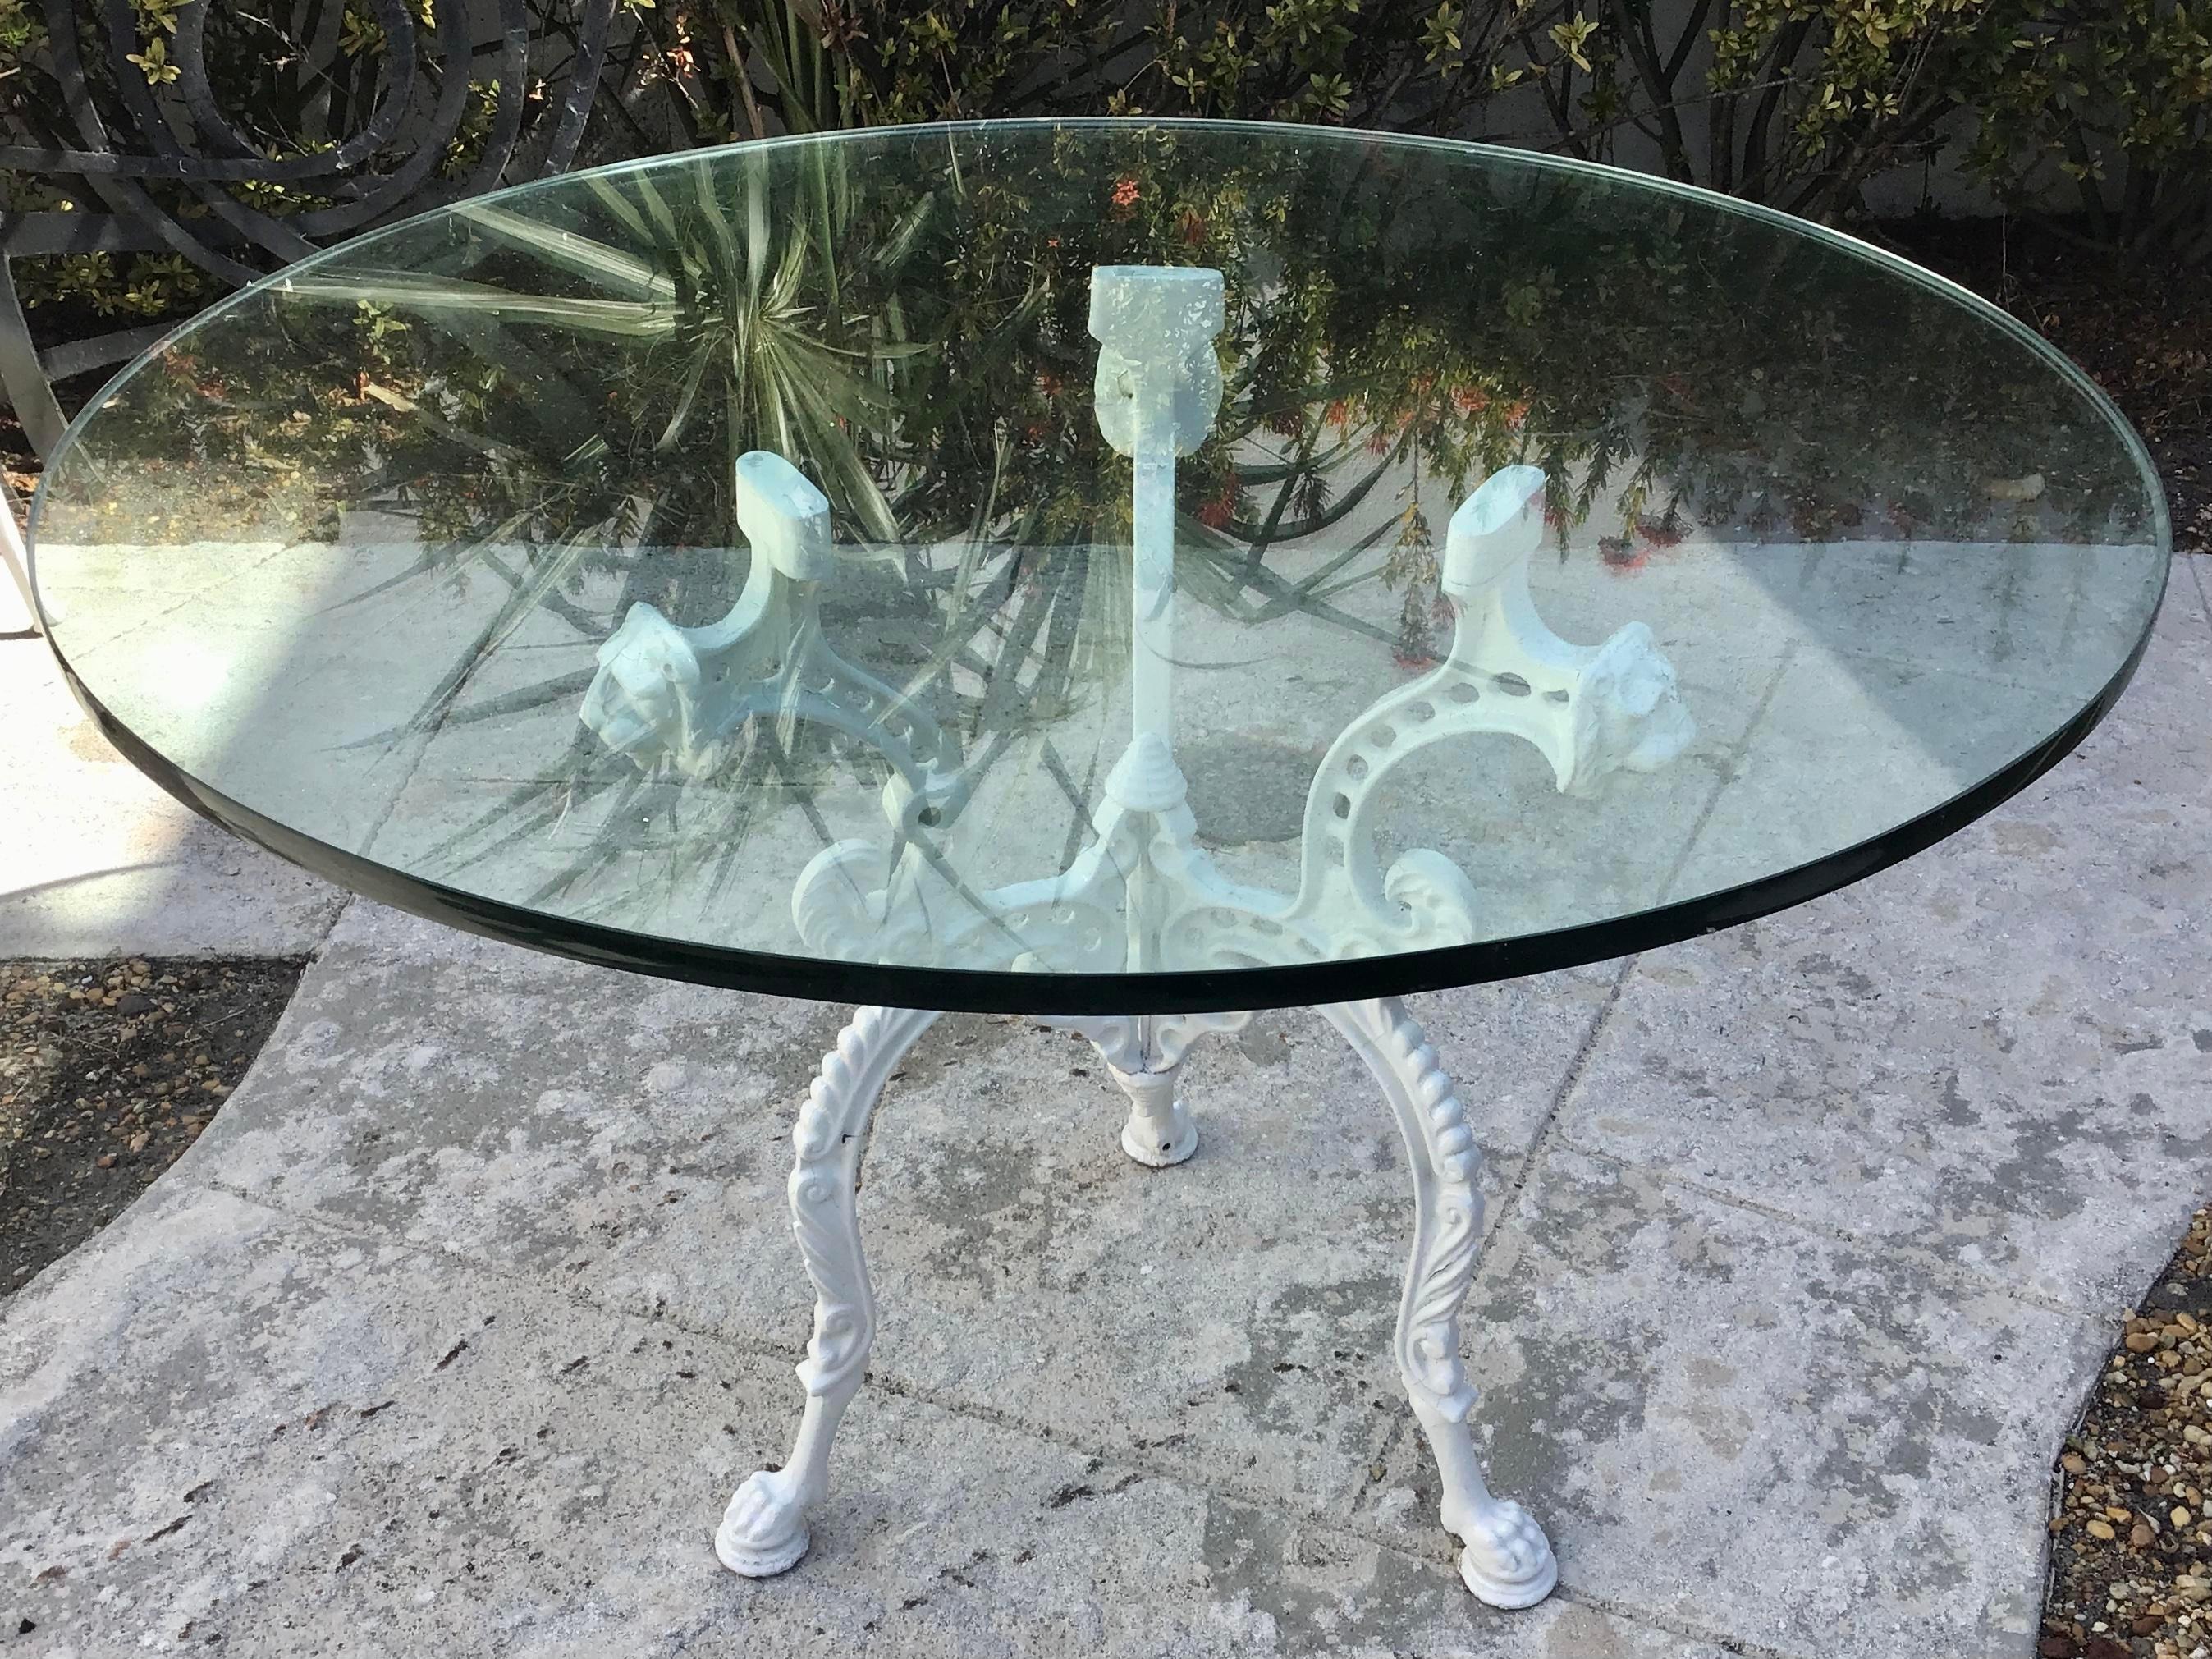 Mid-20th Century Palm Beach Regency Patio Round Dining Table with Glass Top